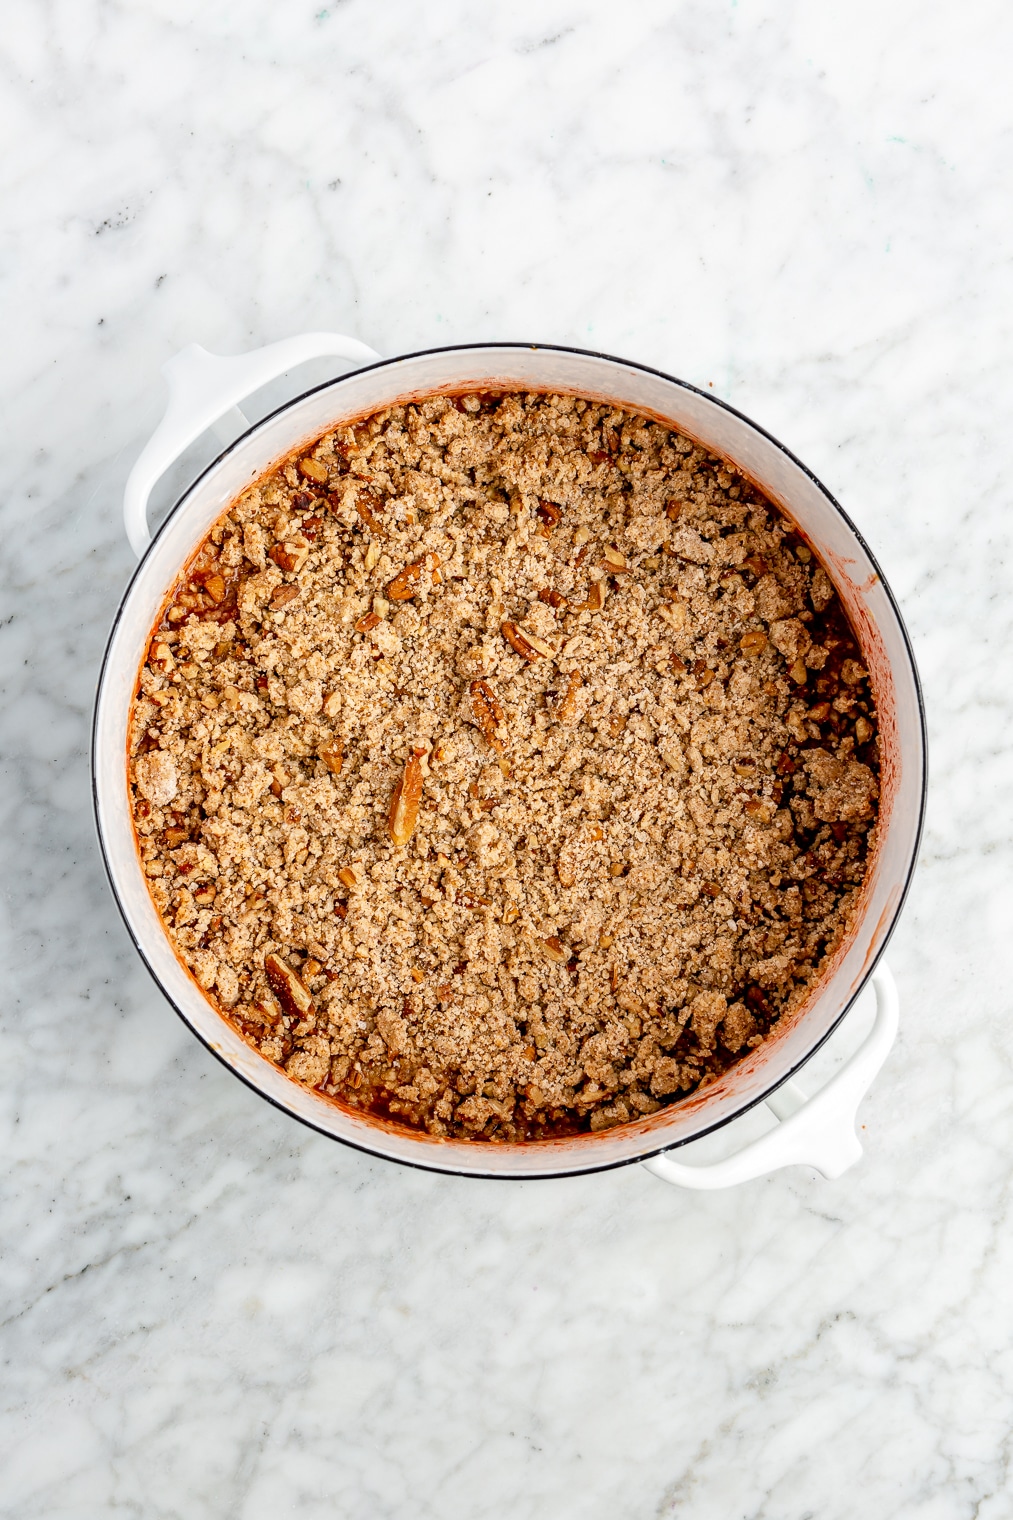 A strawberry rhubarb crisp before being baked in the oven.